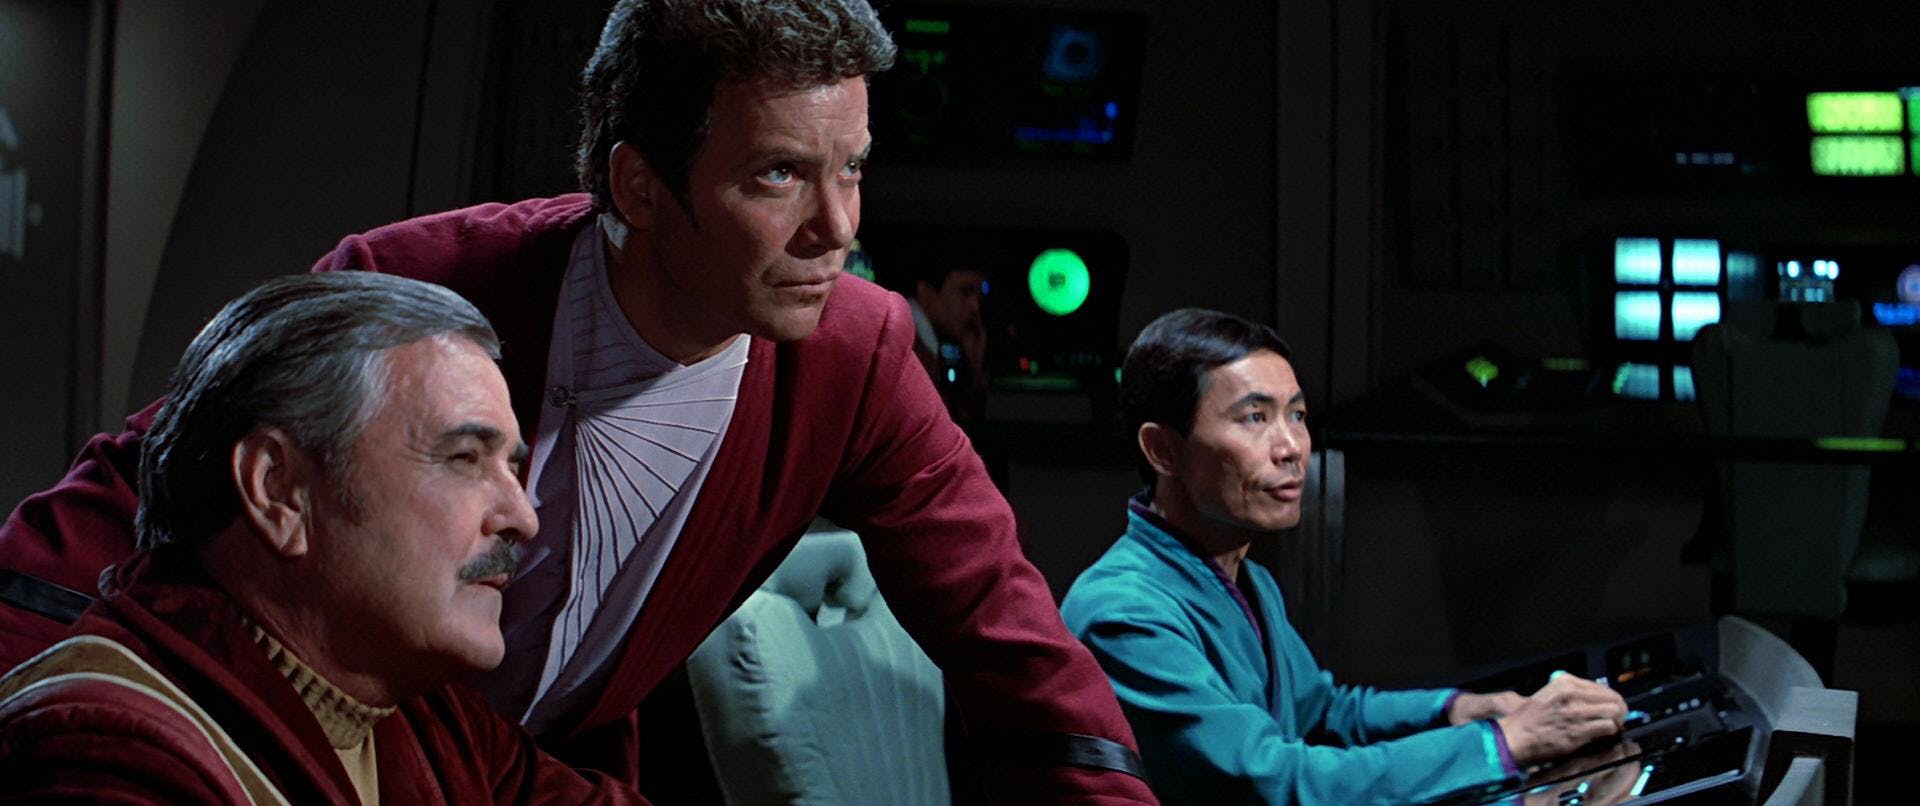 James Kirk leans over between Montgomery Scott and Hikaru Sulu at their stations as they all stare intently at the viewscreen in front of them in Star Trek III: The Search for Spock